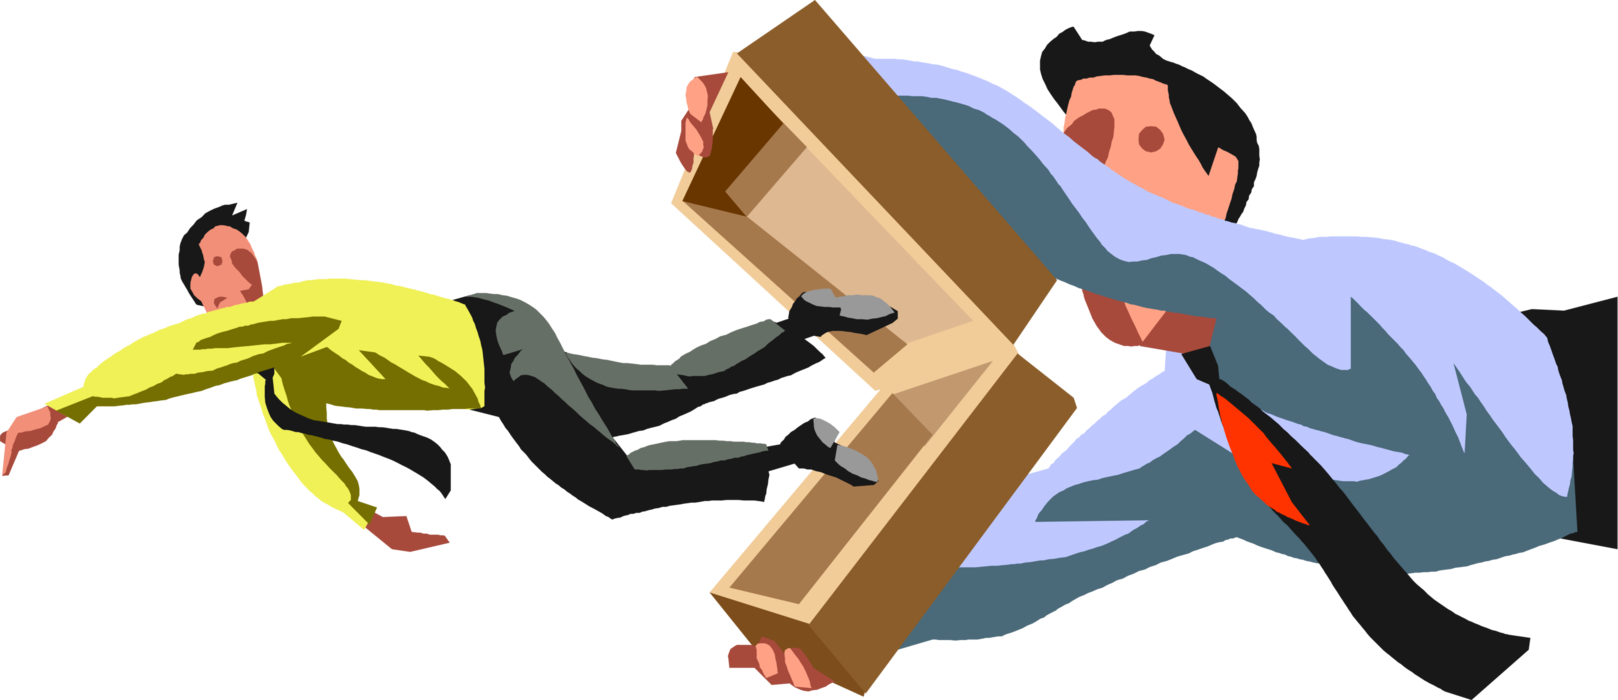 Vector Illustration of Businessman Traps Business Colleague in Trap Box